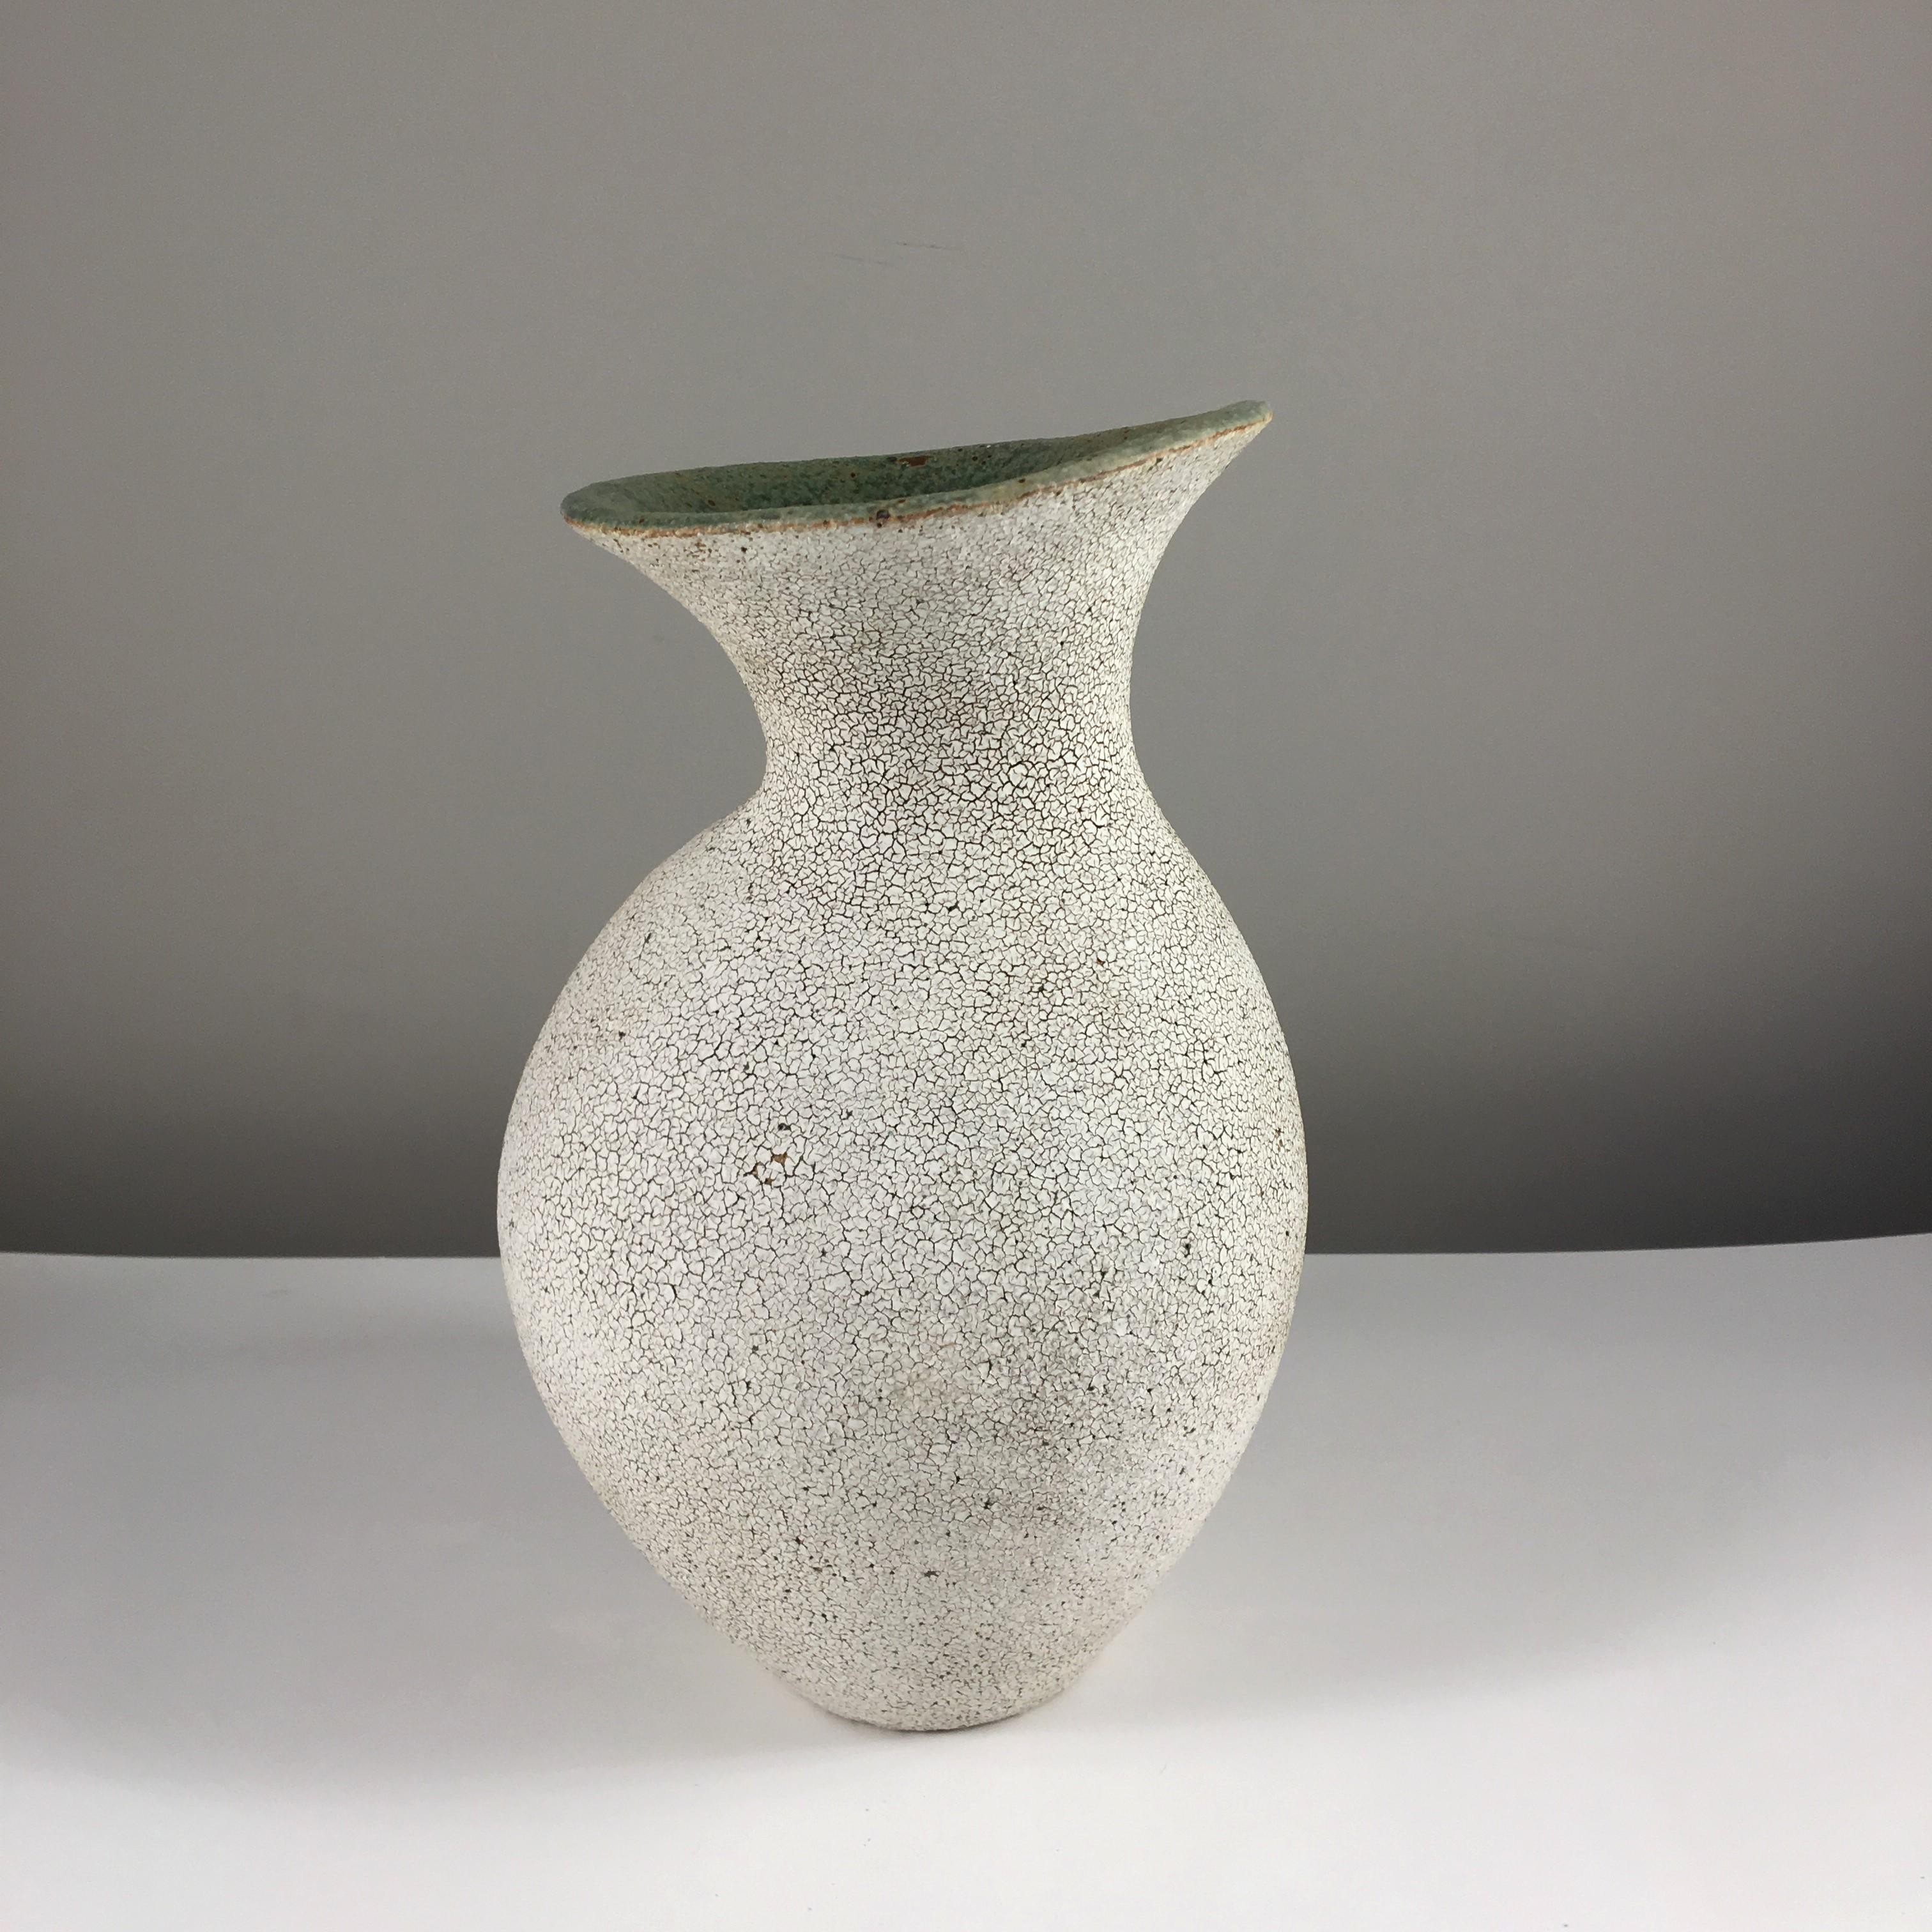 Curved Wide Neck Ceramic Vase by Yumiko Kuga. Measures: Height 11